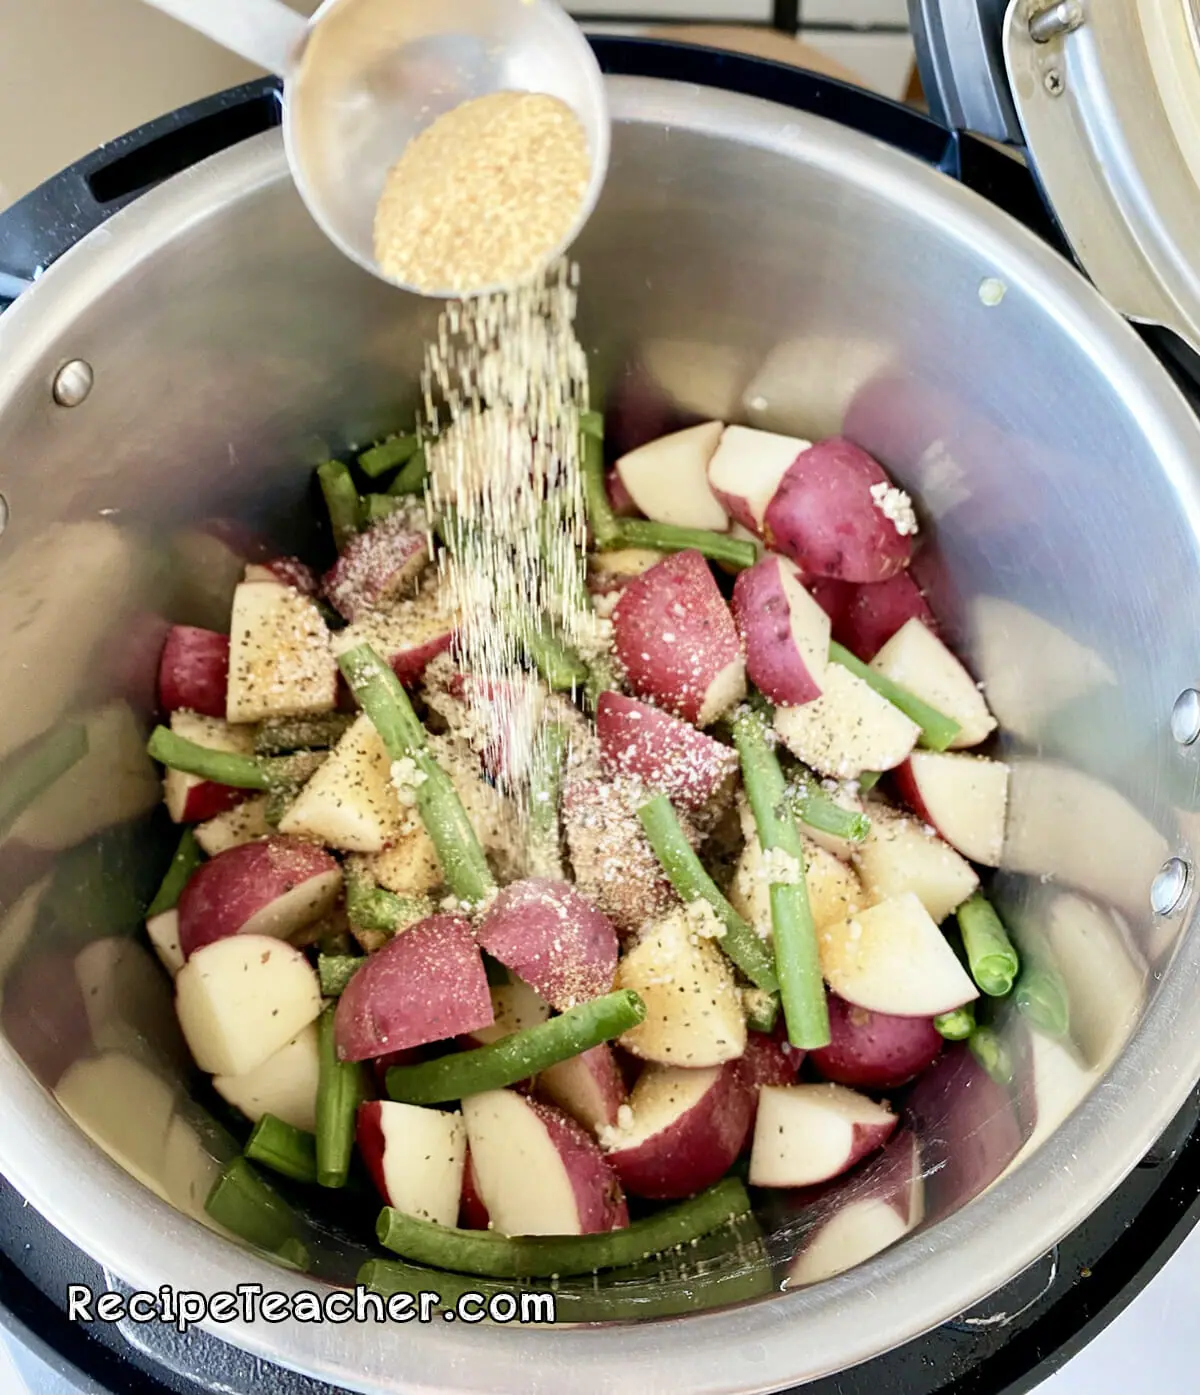 Recipe for Instant Pot potatoes and green beans with a creamy Parmesan garlic sauce.